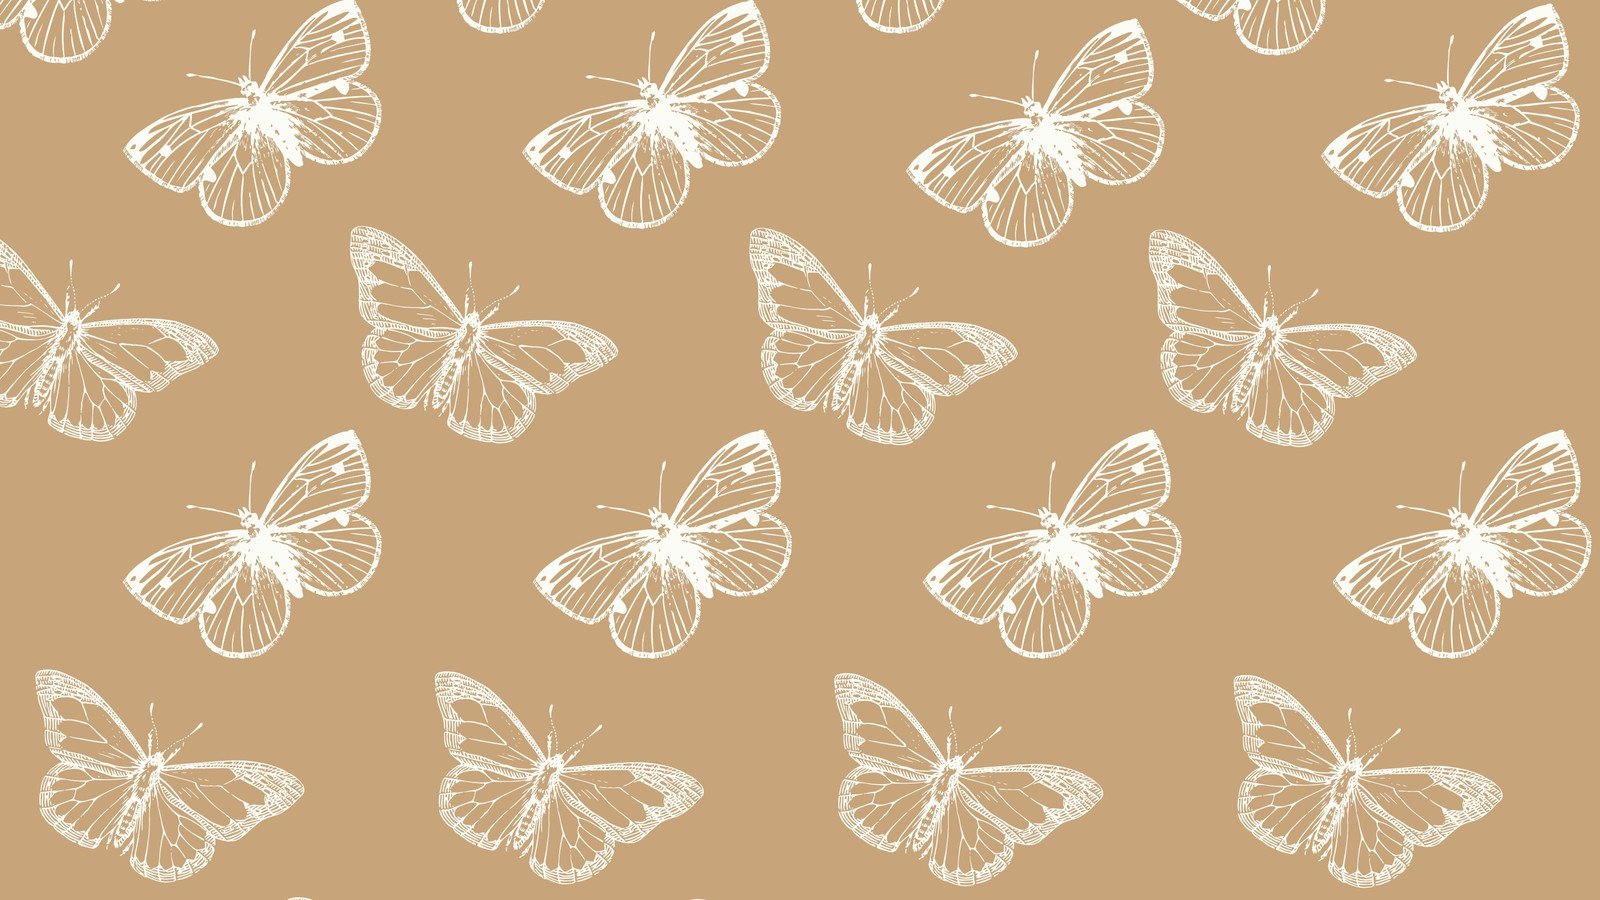 And Customizable Butterfly Wallpaper Templates